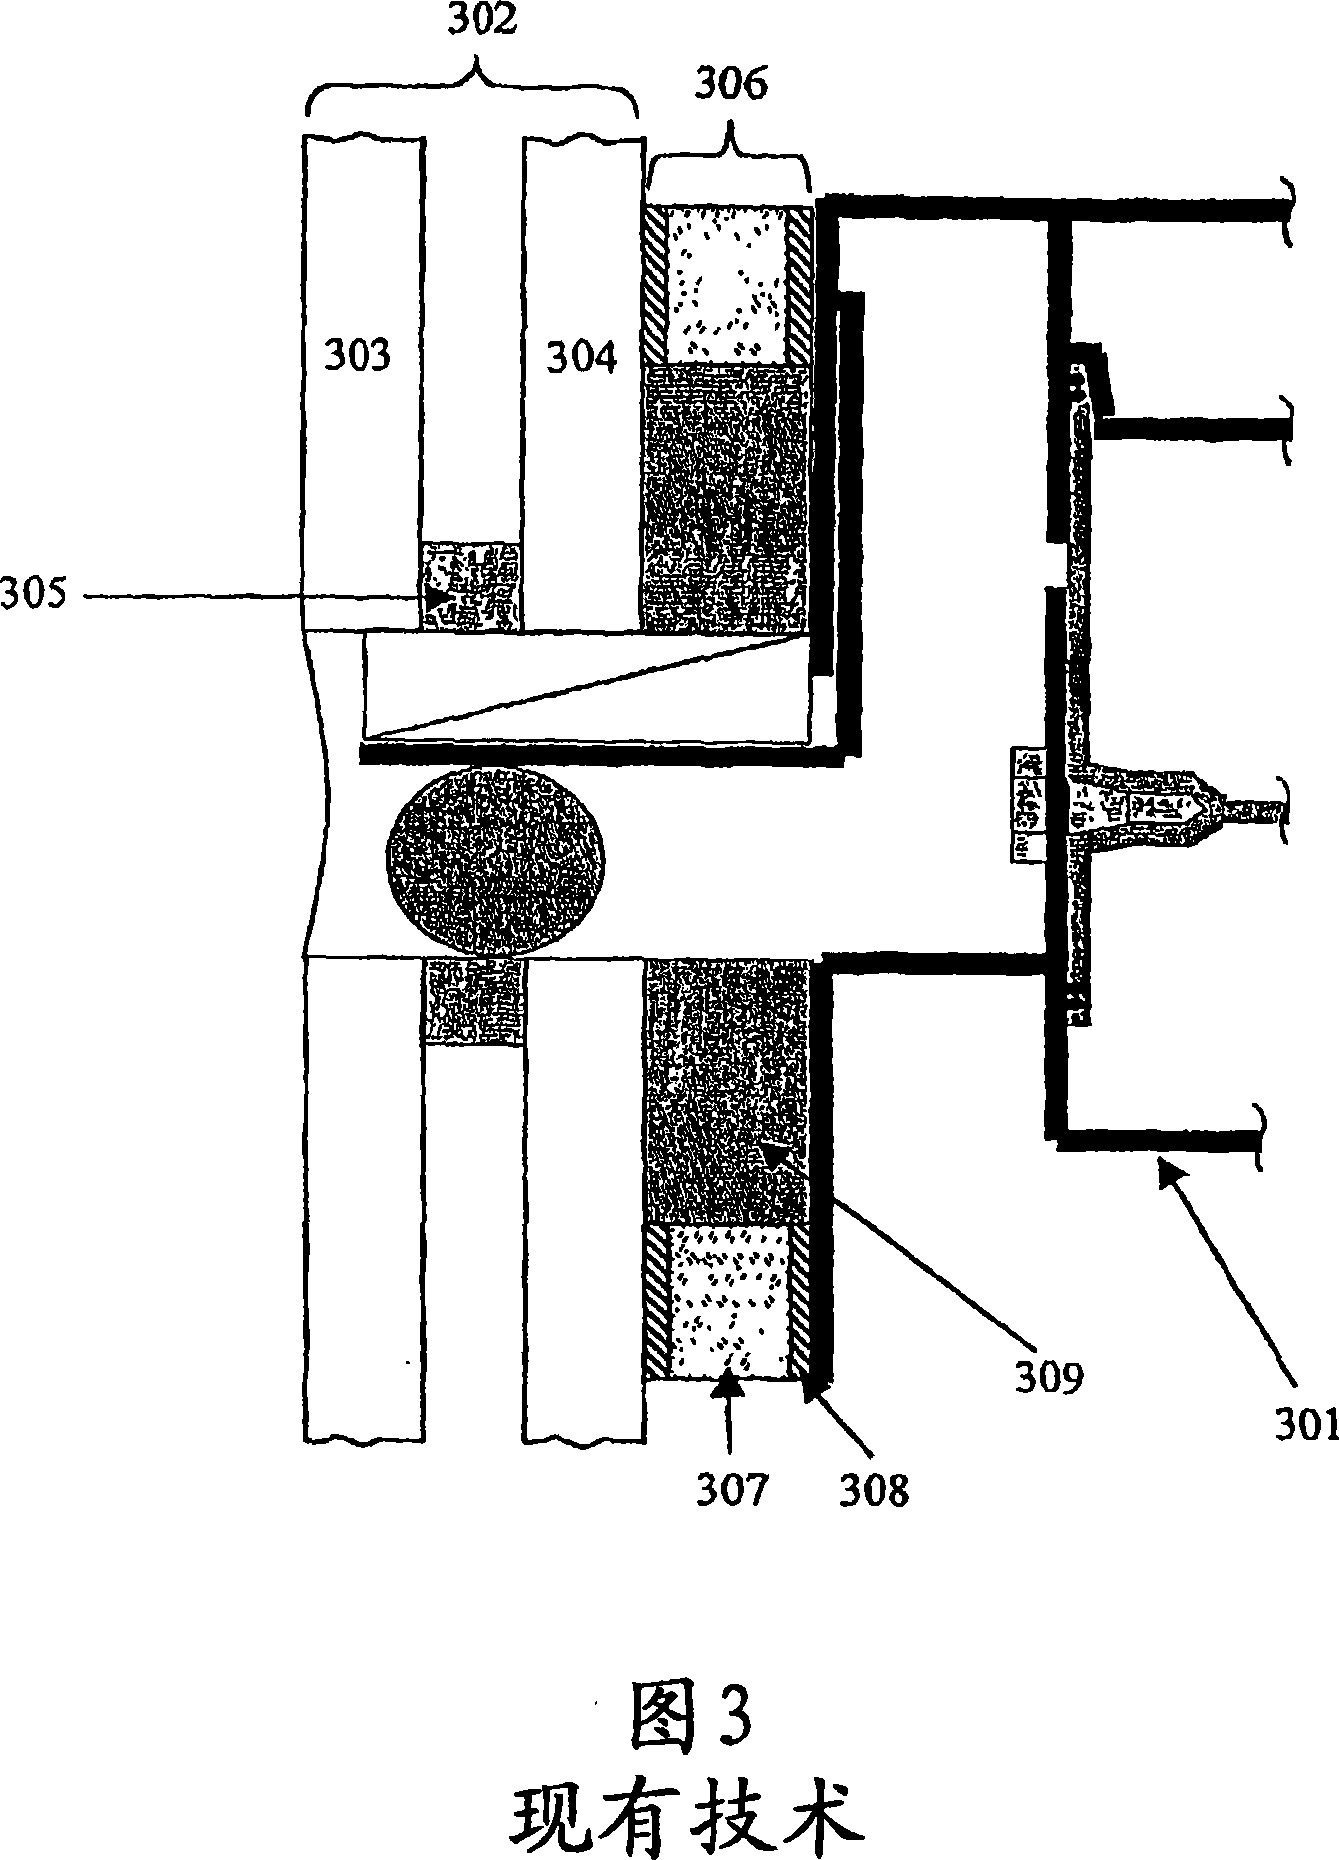 Pressure sensitive adhesives and methods for their preparation